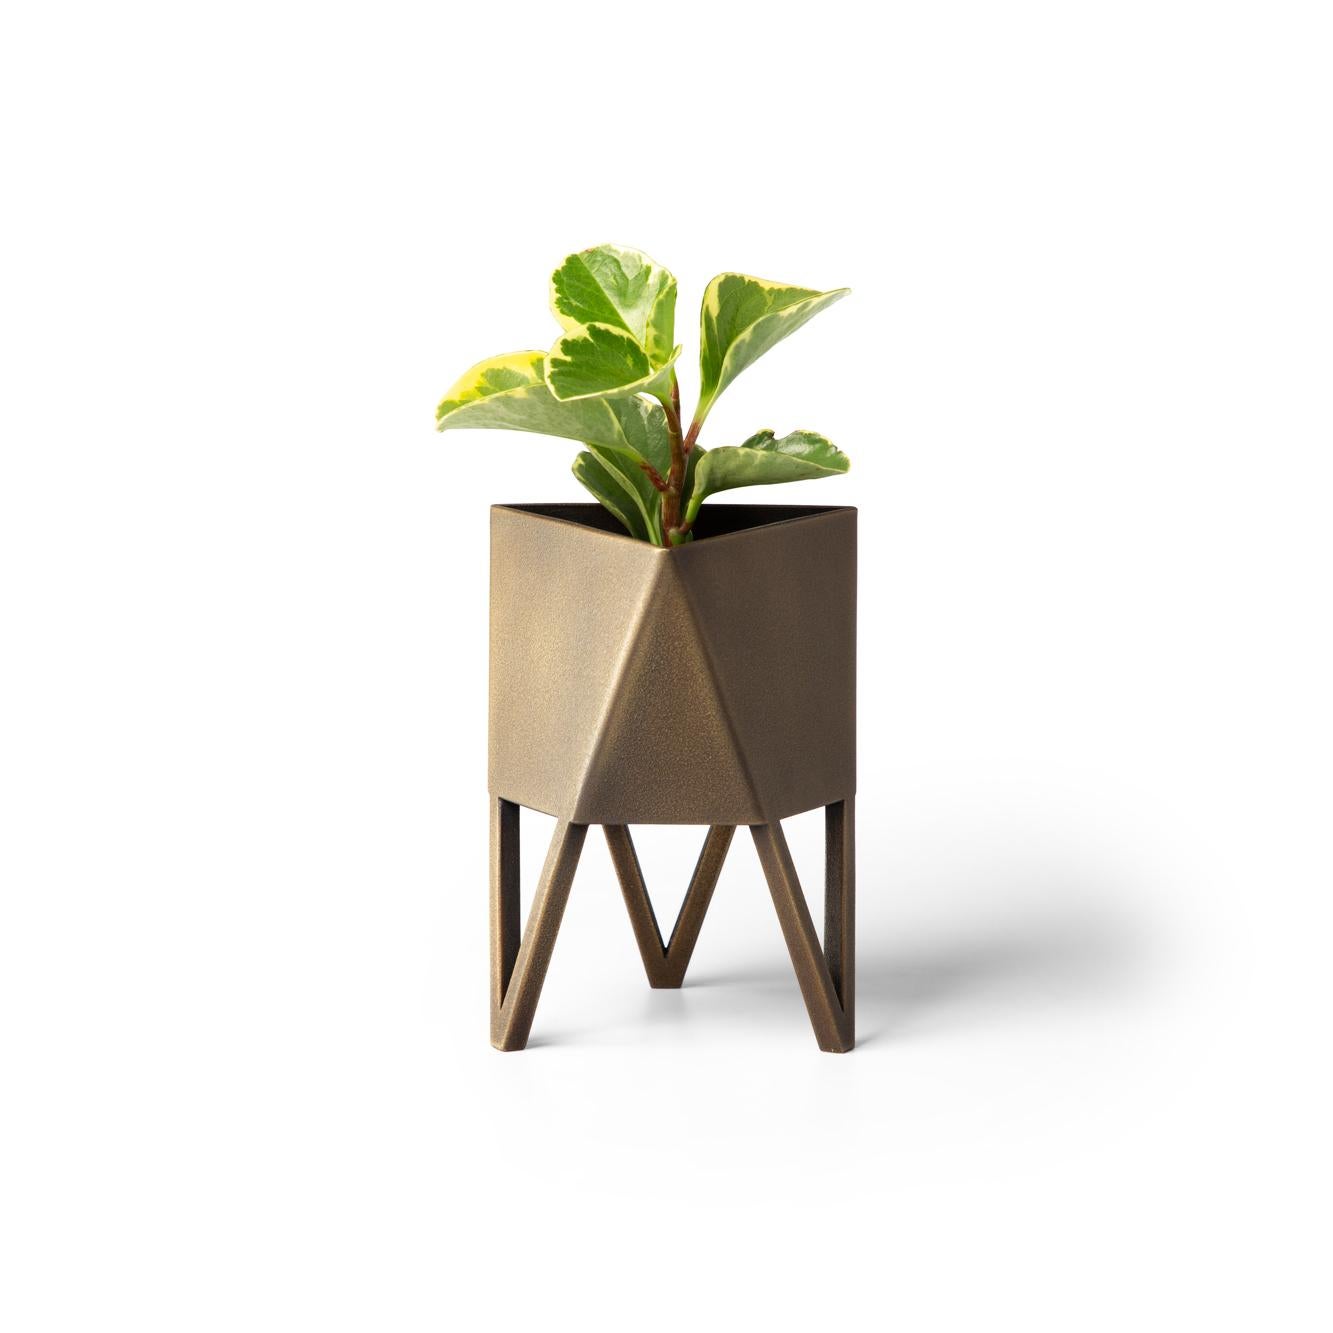 Deca Planter in Mineral, Large, by Force/Collide, 2023 9